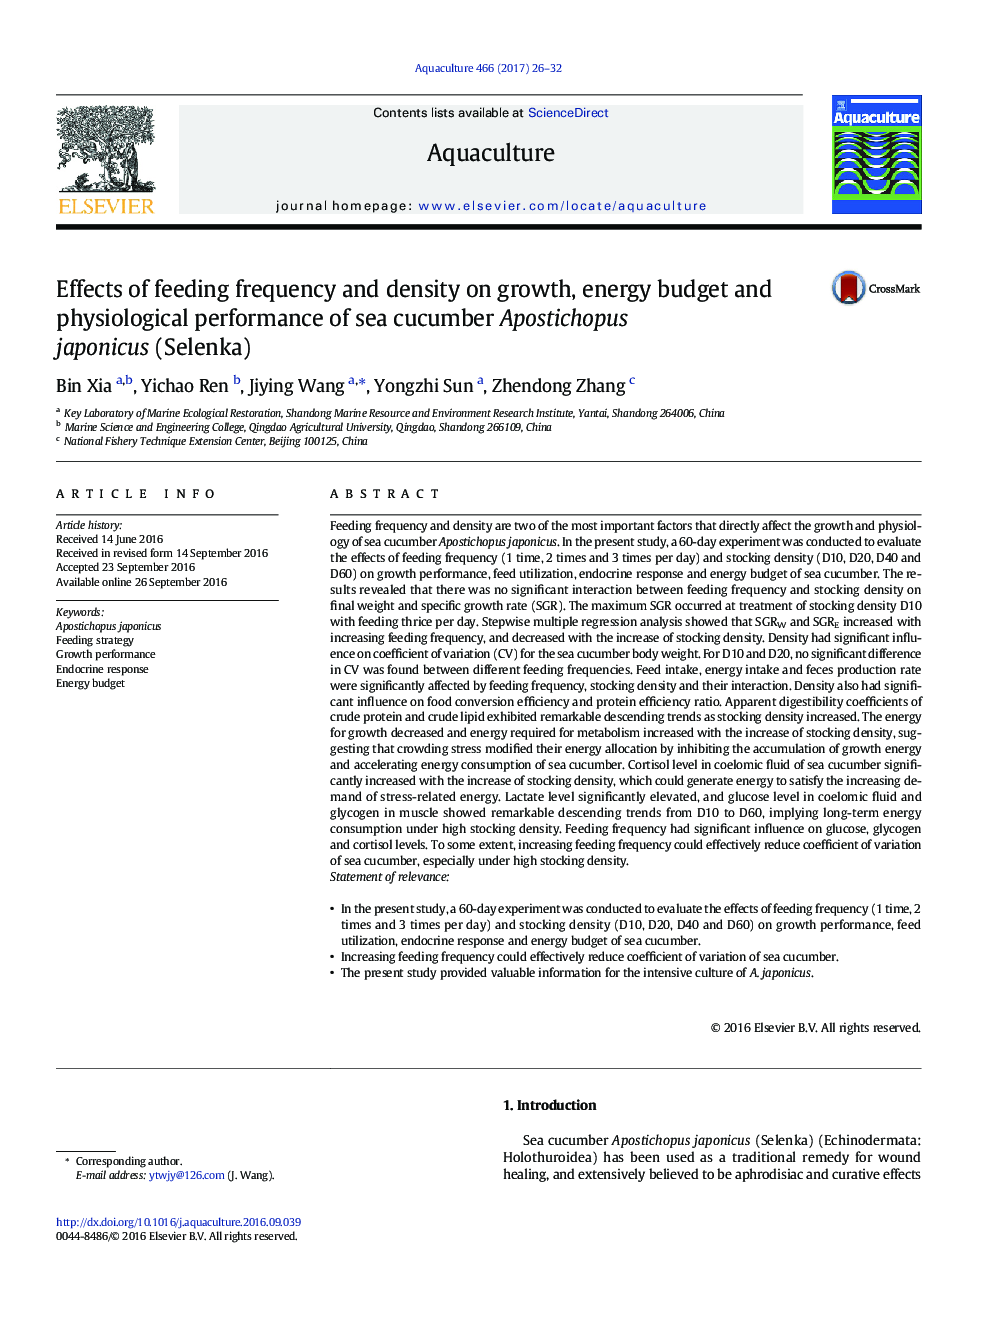 Effects of feeding frequency and density on growth, energy budget and physiological performance of sea cucumber Apostichopus japonicus (Selenka)